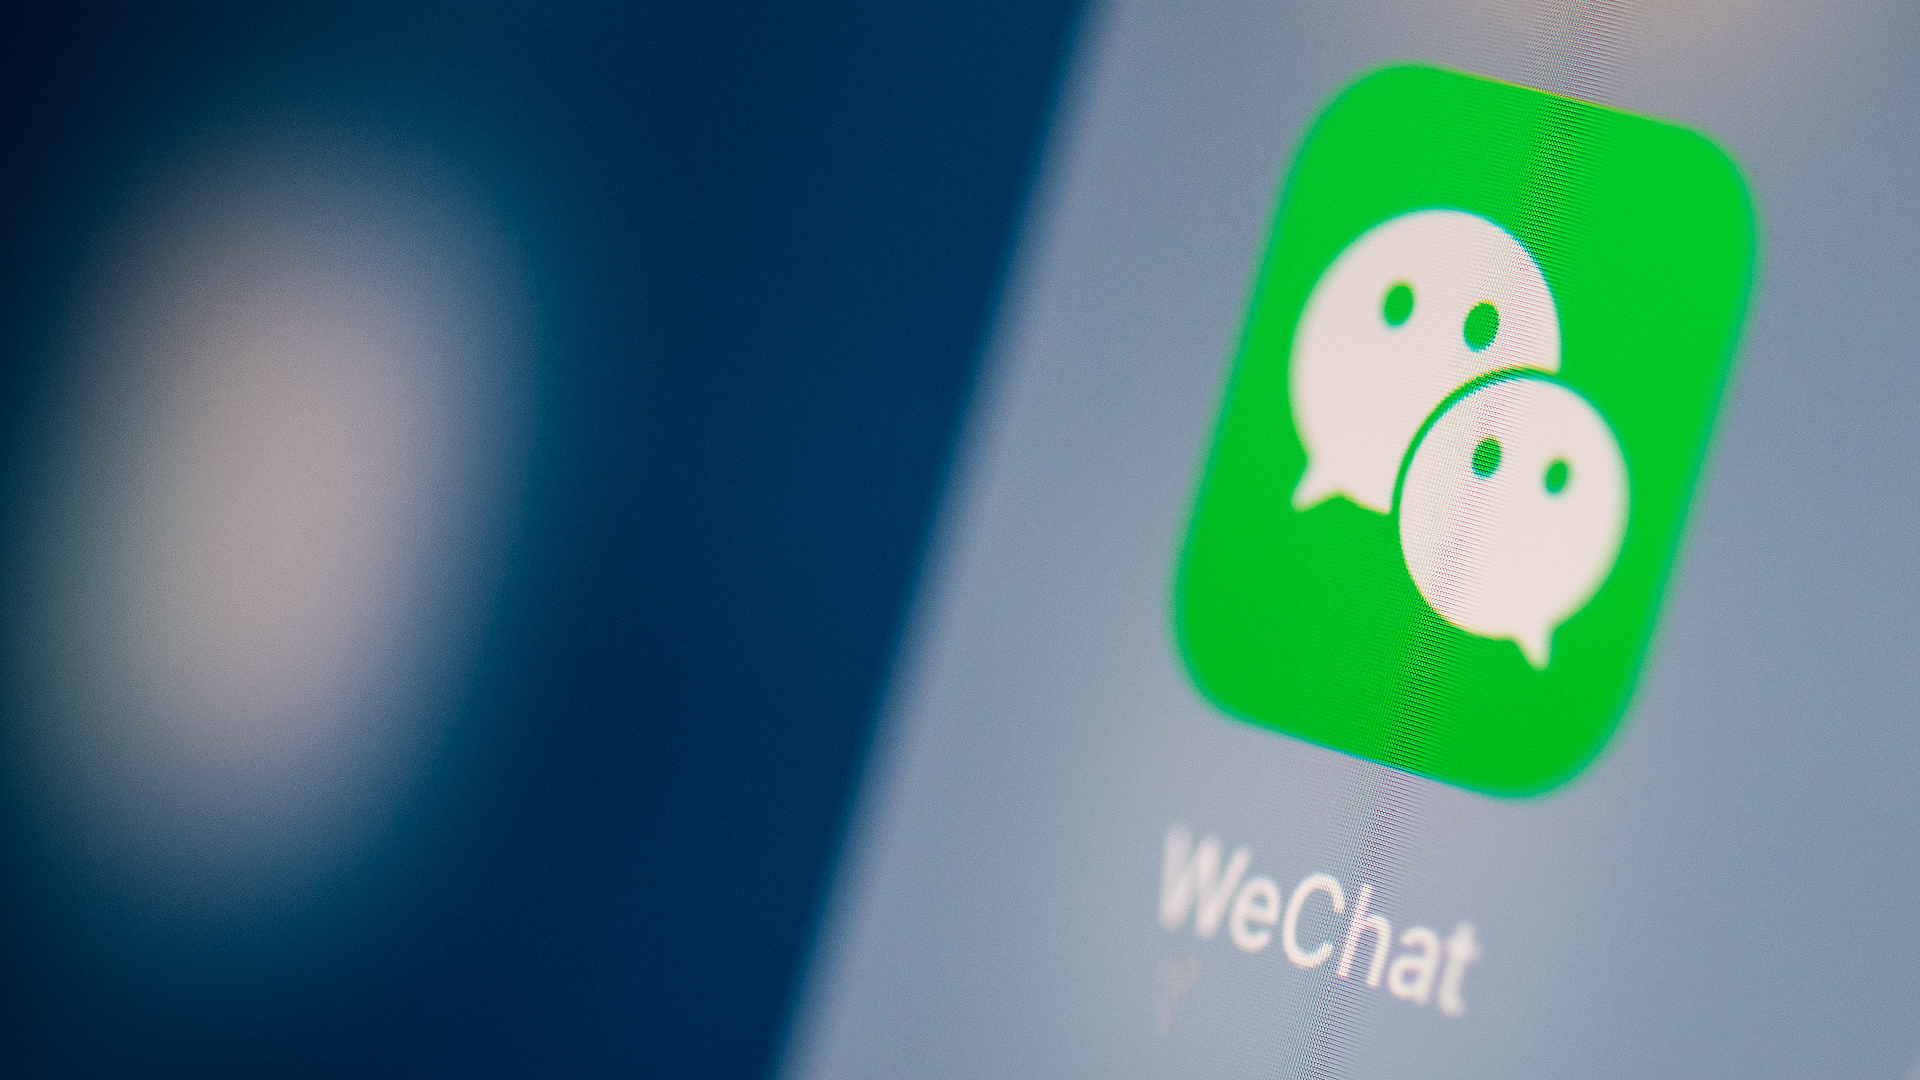 What is WeChat and what can it do?